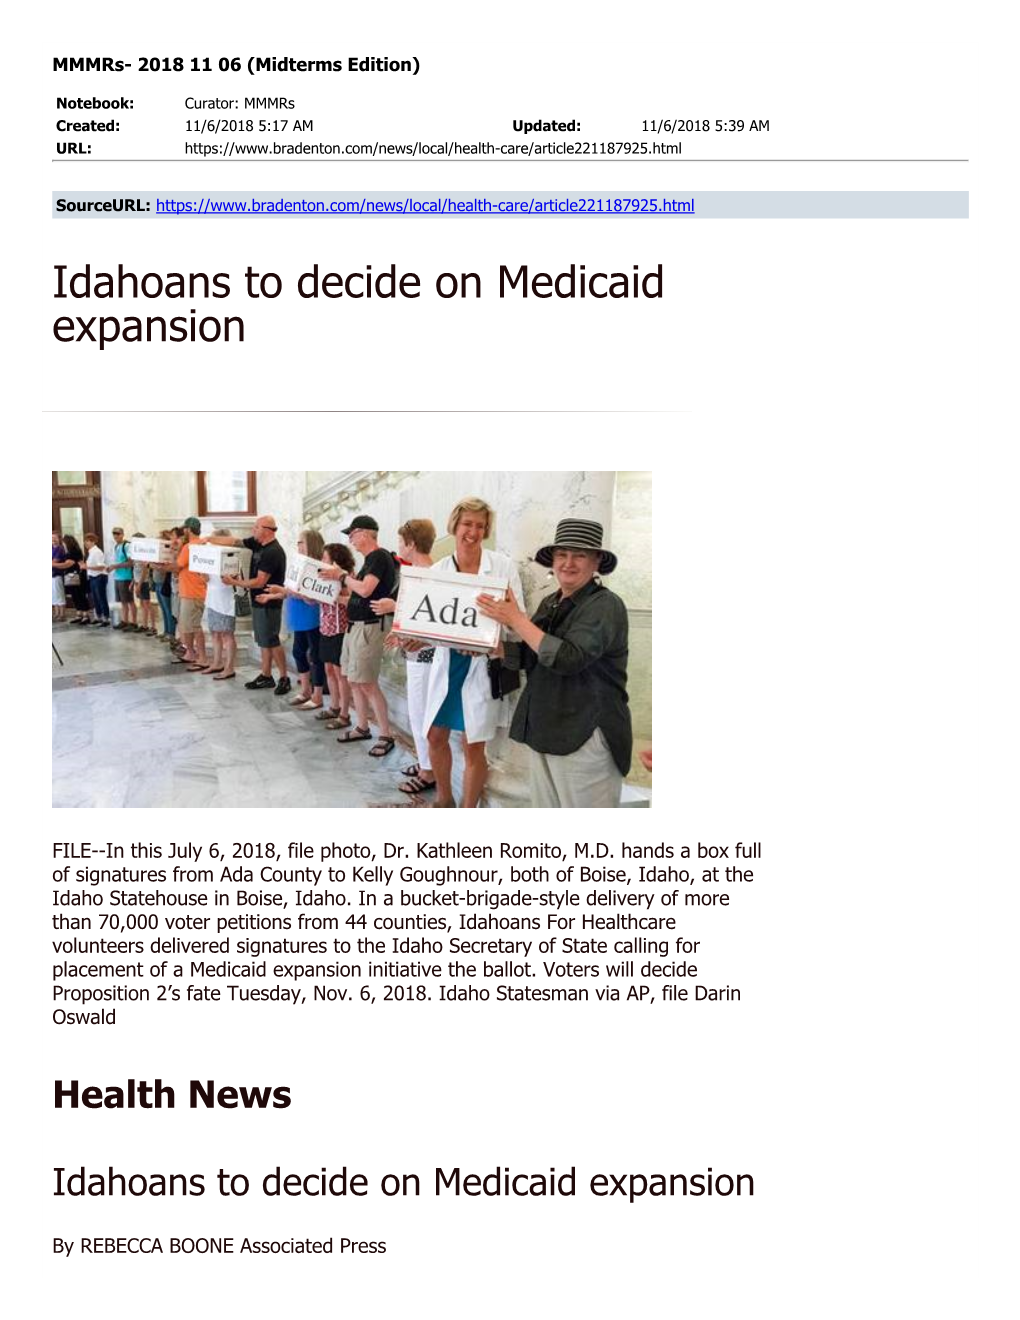 Idahoans to Decide on Medicaid Expansion